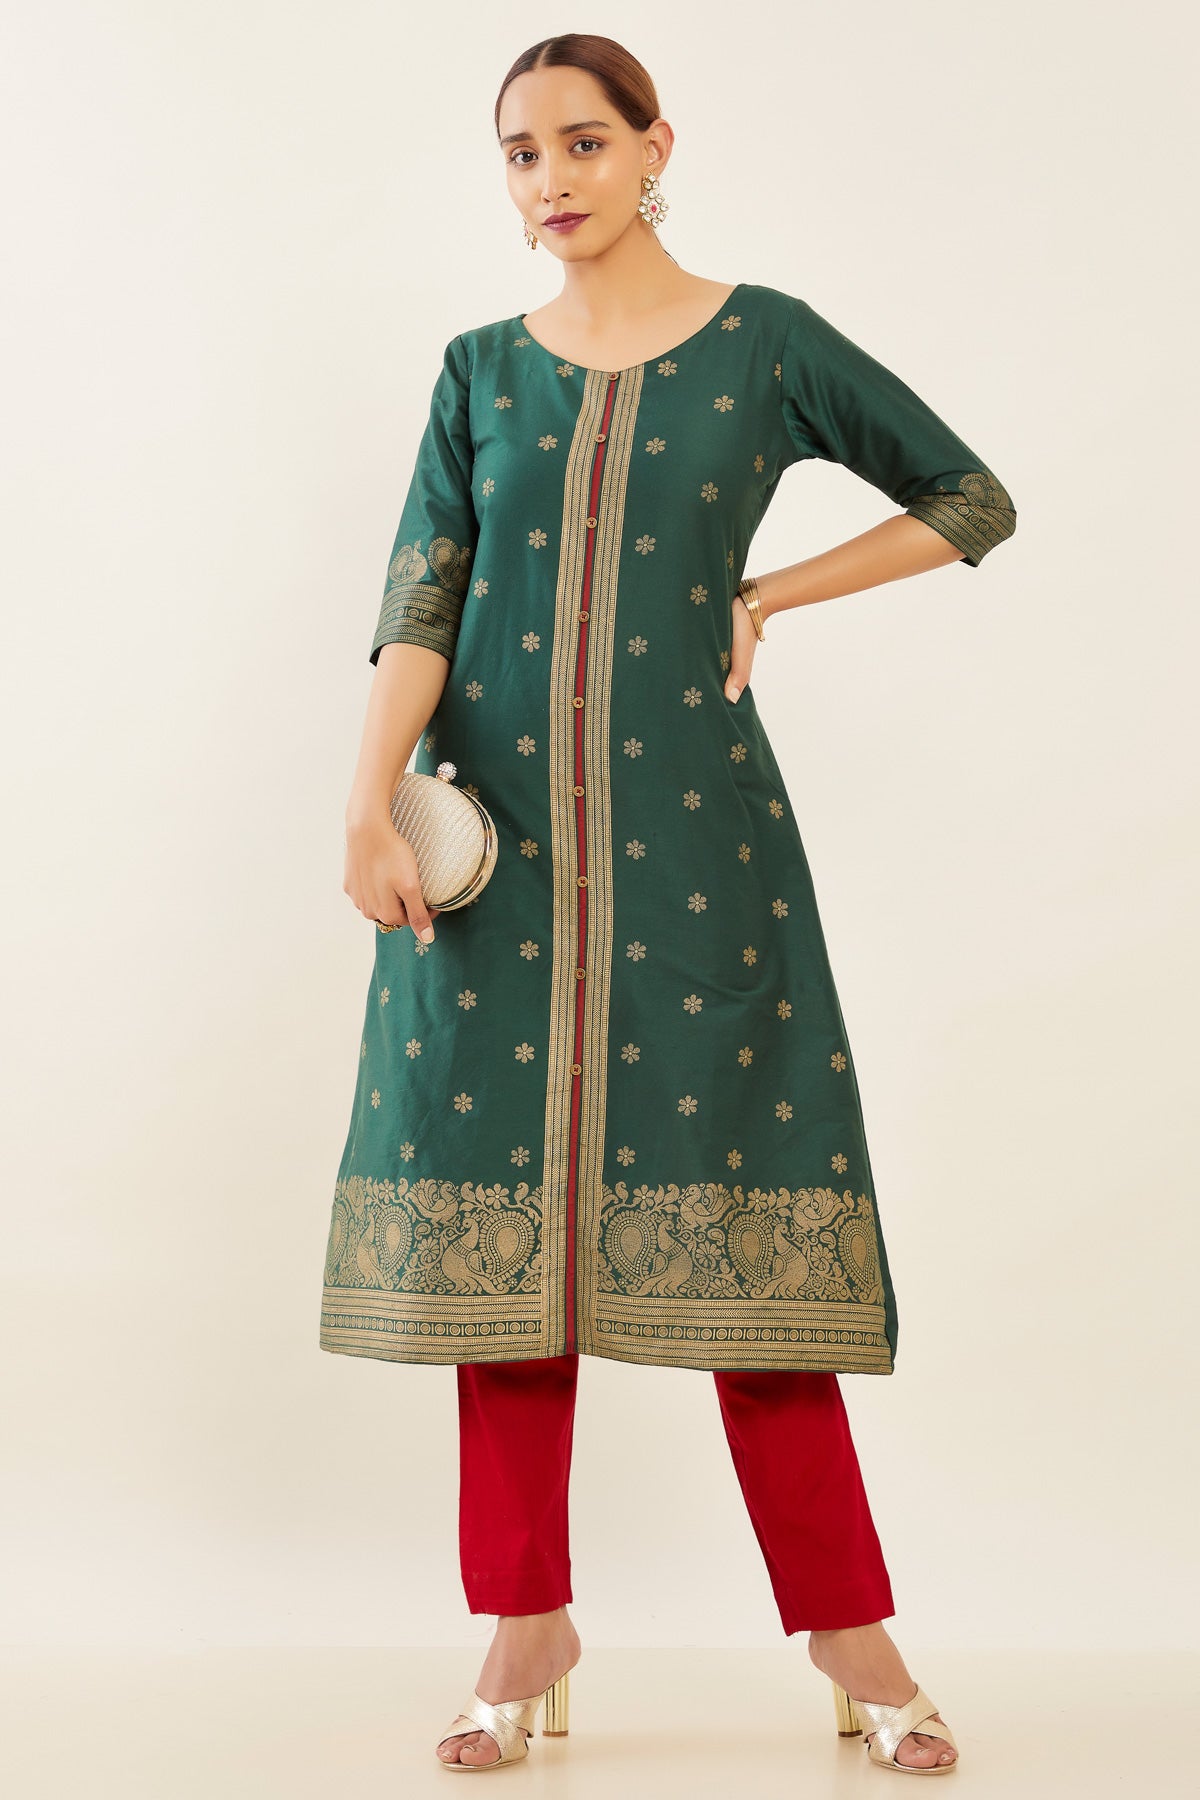 All Over Floral & Peacock Motif Printed A-Line Kurta - Green